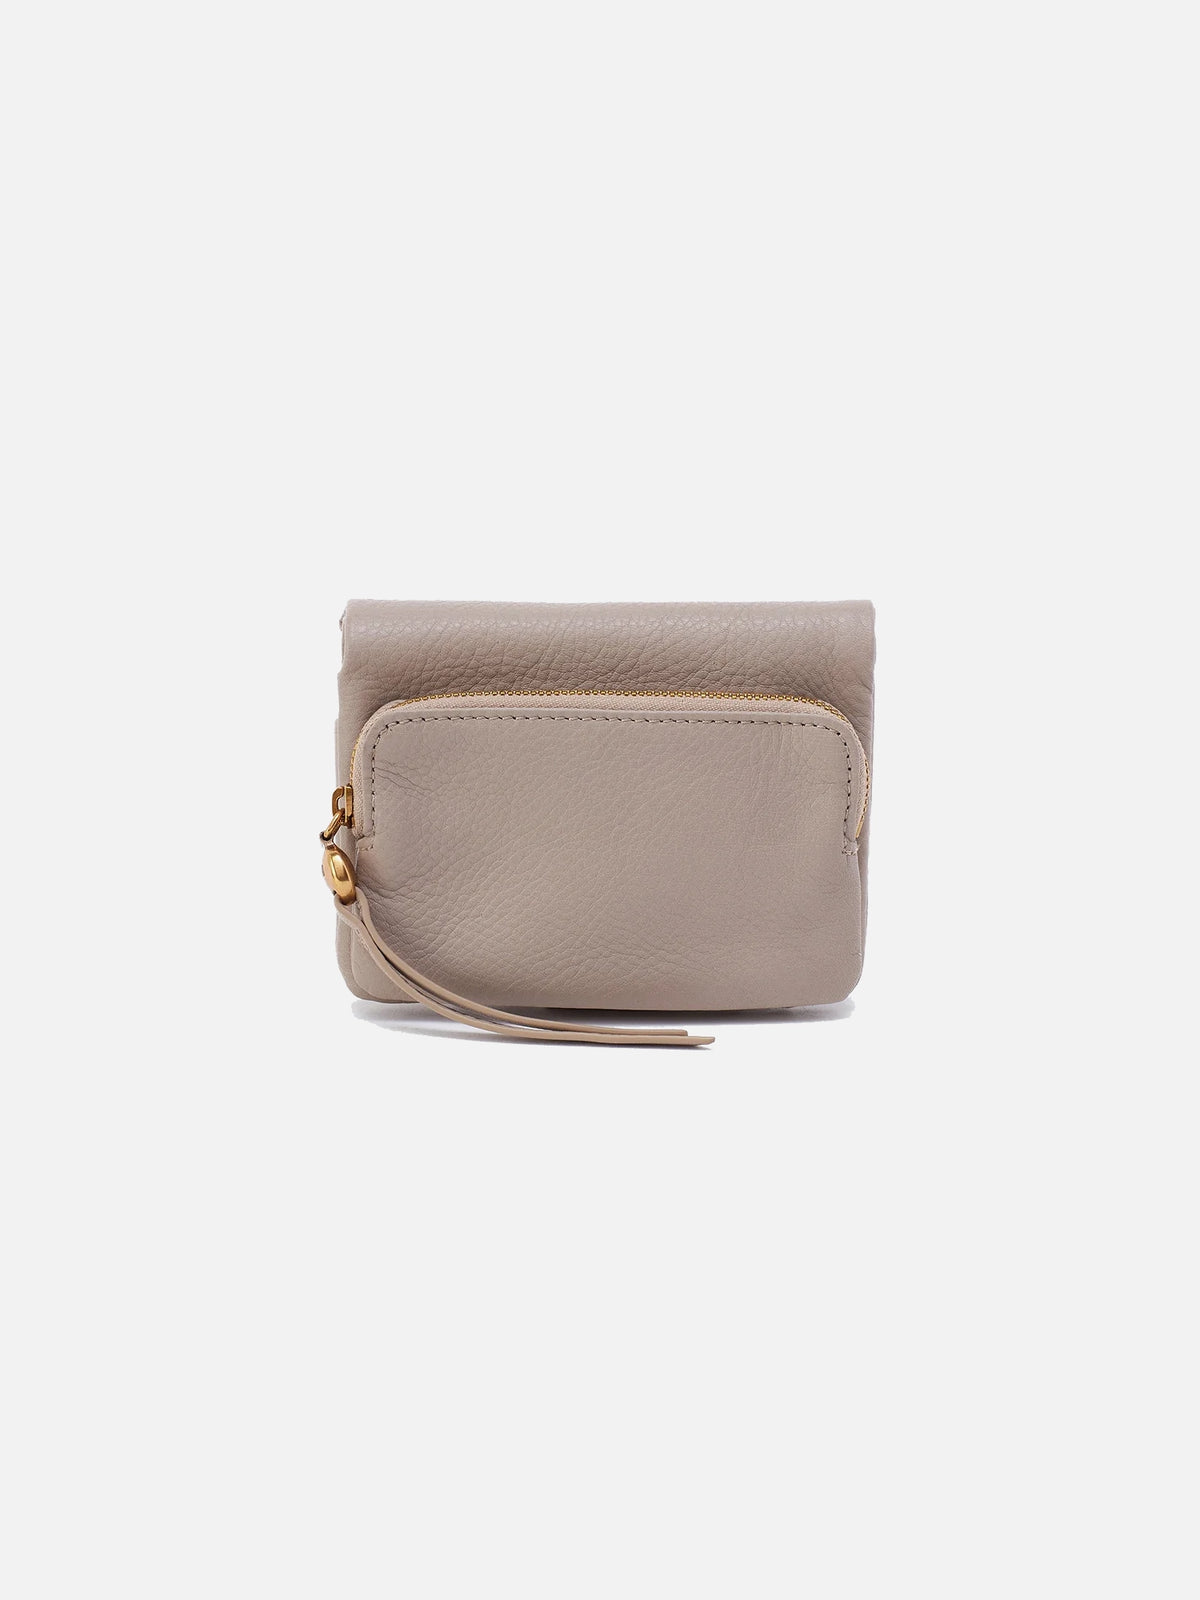 hobo fern bifold wallet in taupe pebbled leather